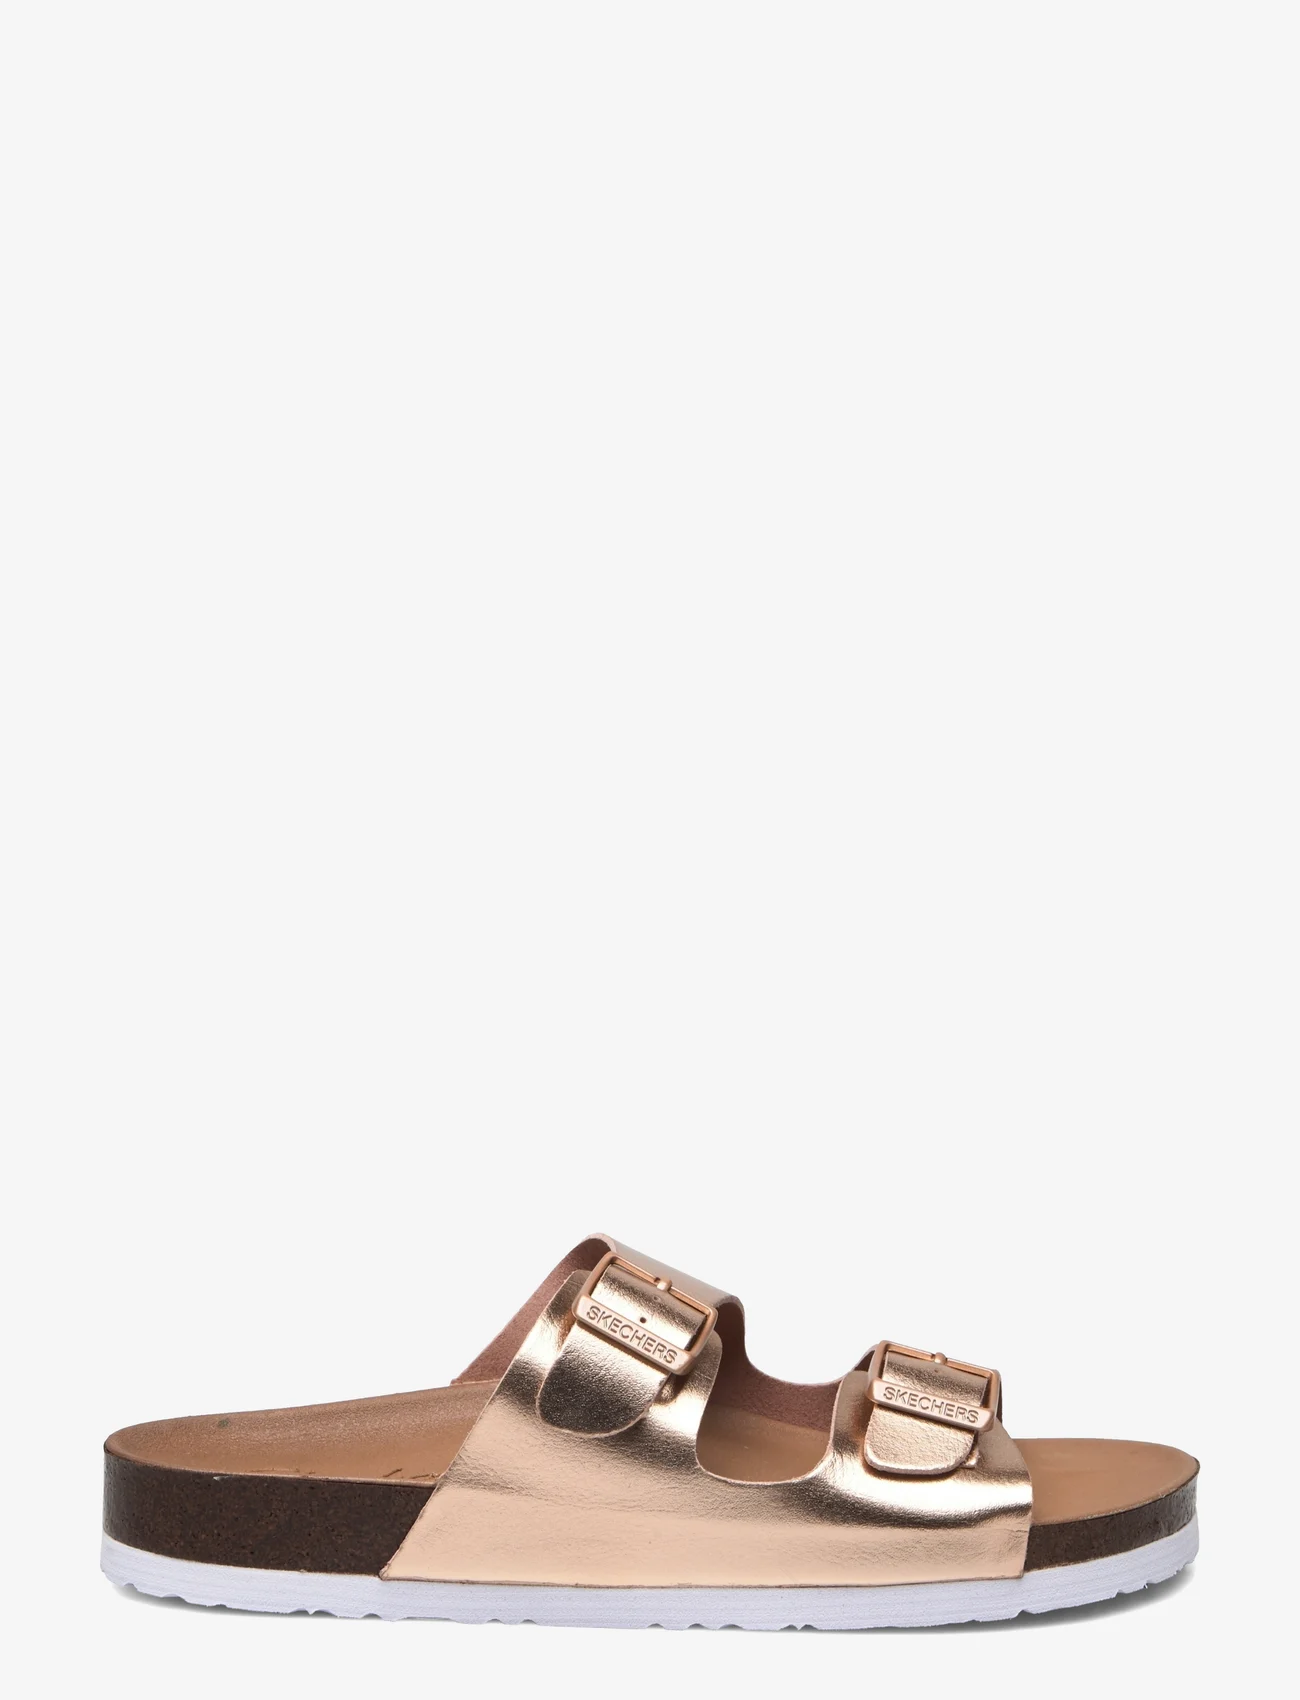 Skechers - Womens Relaxed Fit: Granola - Bloom Farm - flat sandals - rsgd rose gold - 1